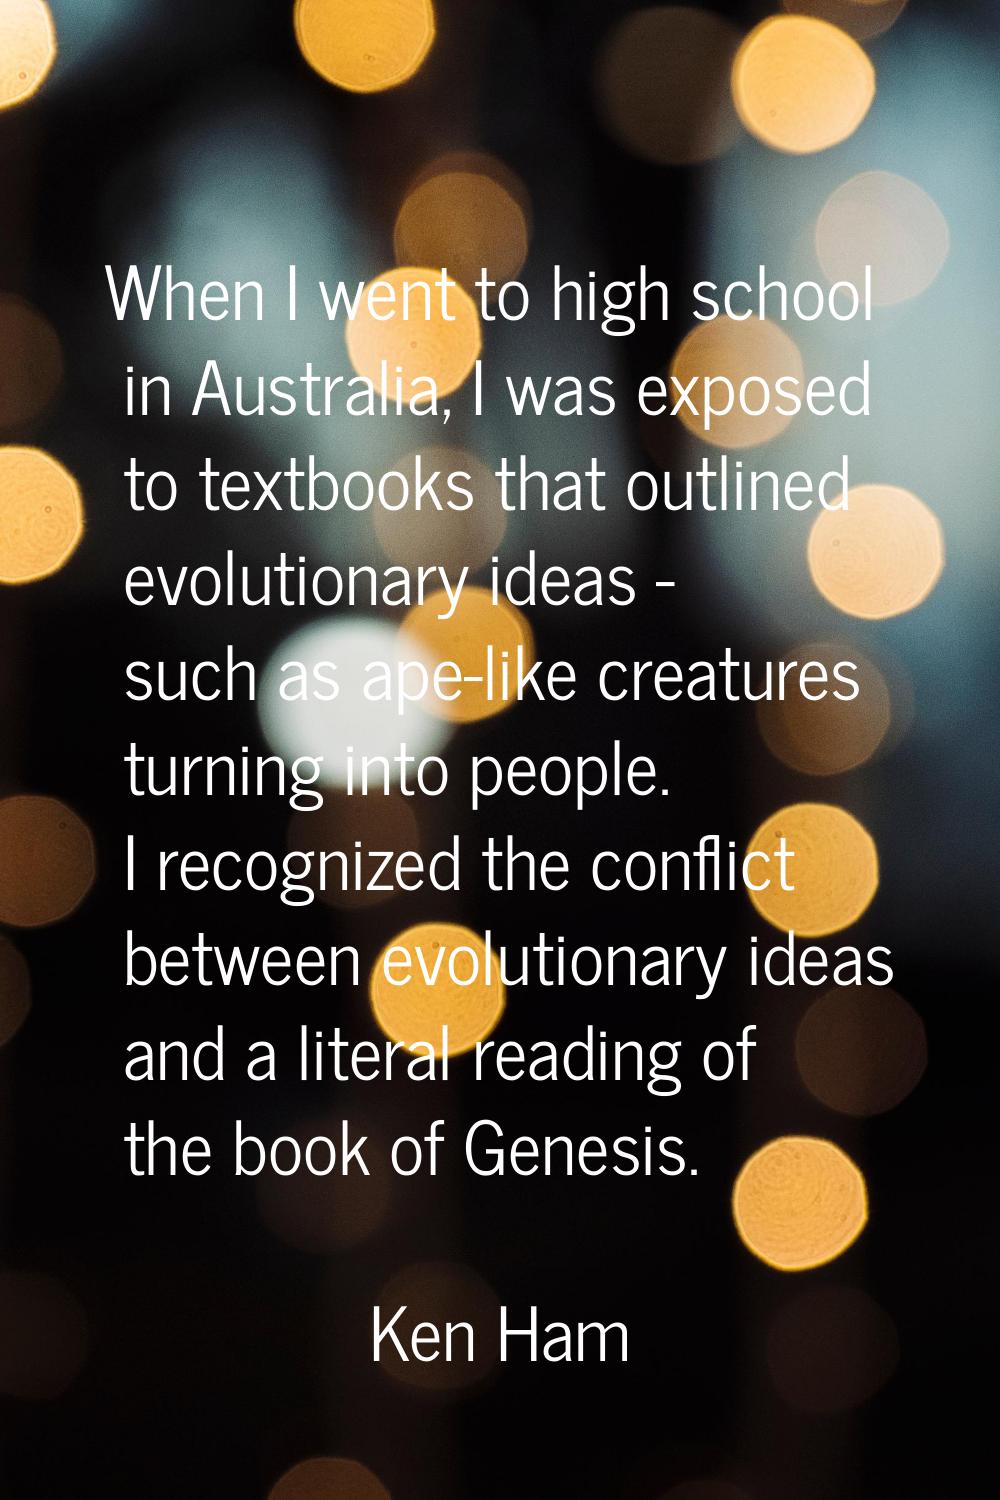 When I went to high school in Australia, I was exposed to textbooks that outlined evolutionary idea